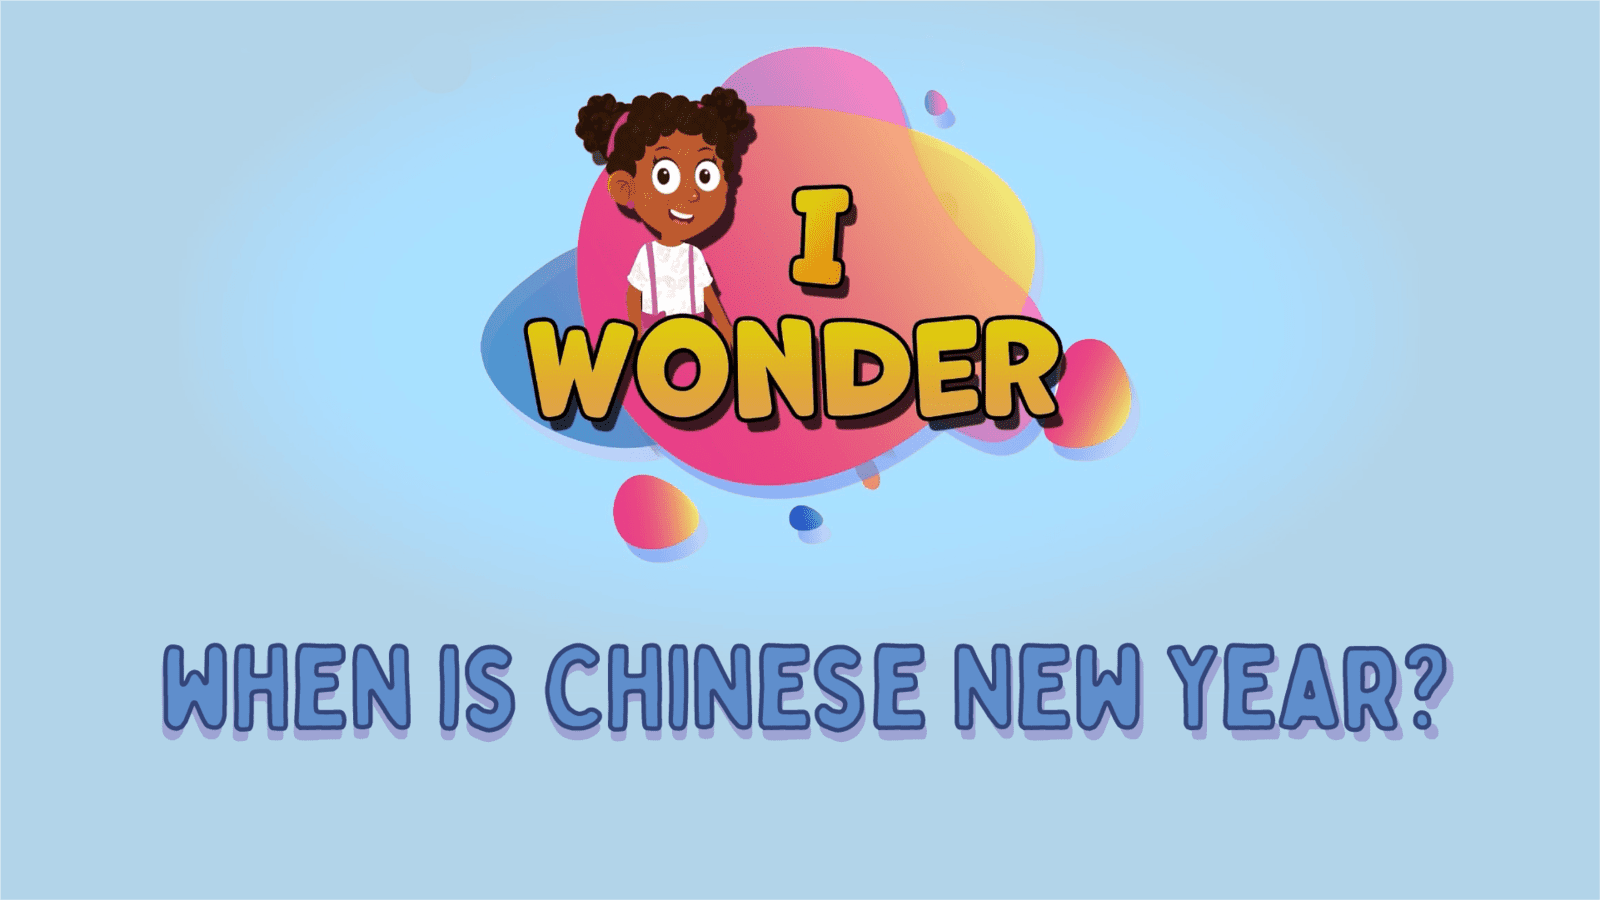 When Is Chinese New Year?